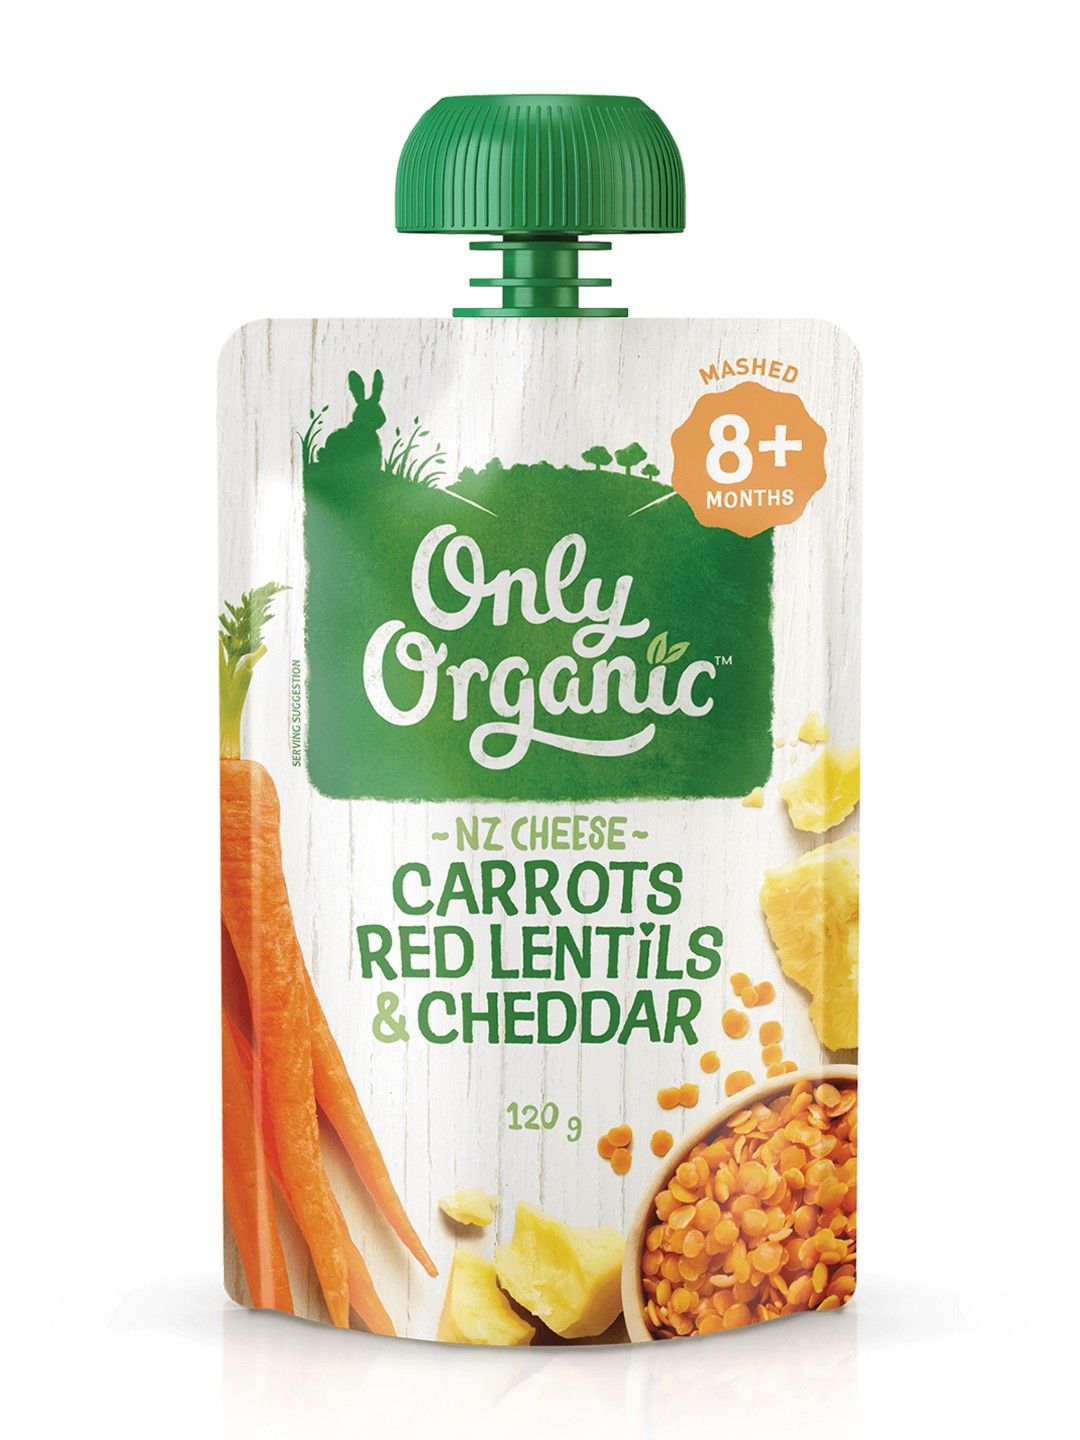 Only Organic Carrots Red Lentils & Cheddar (120g)